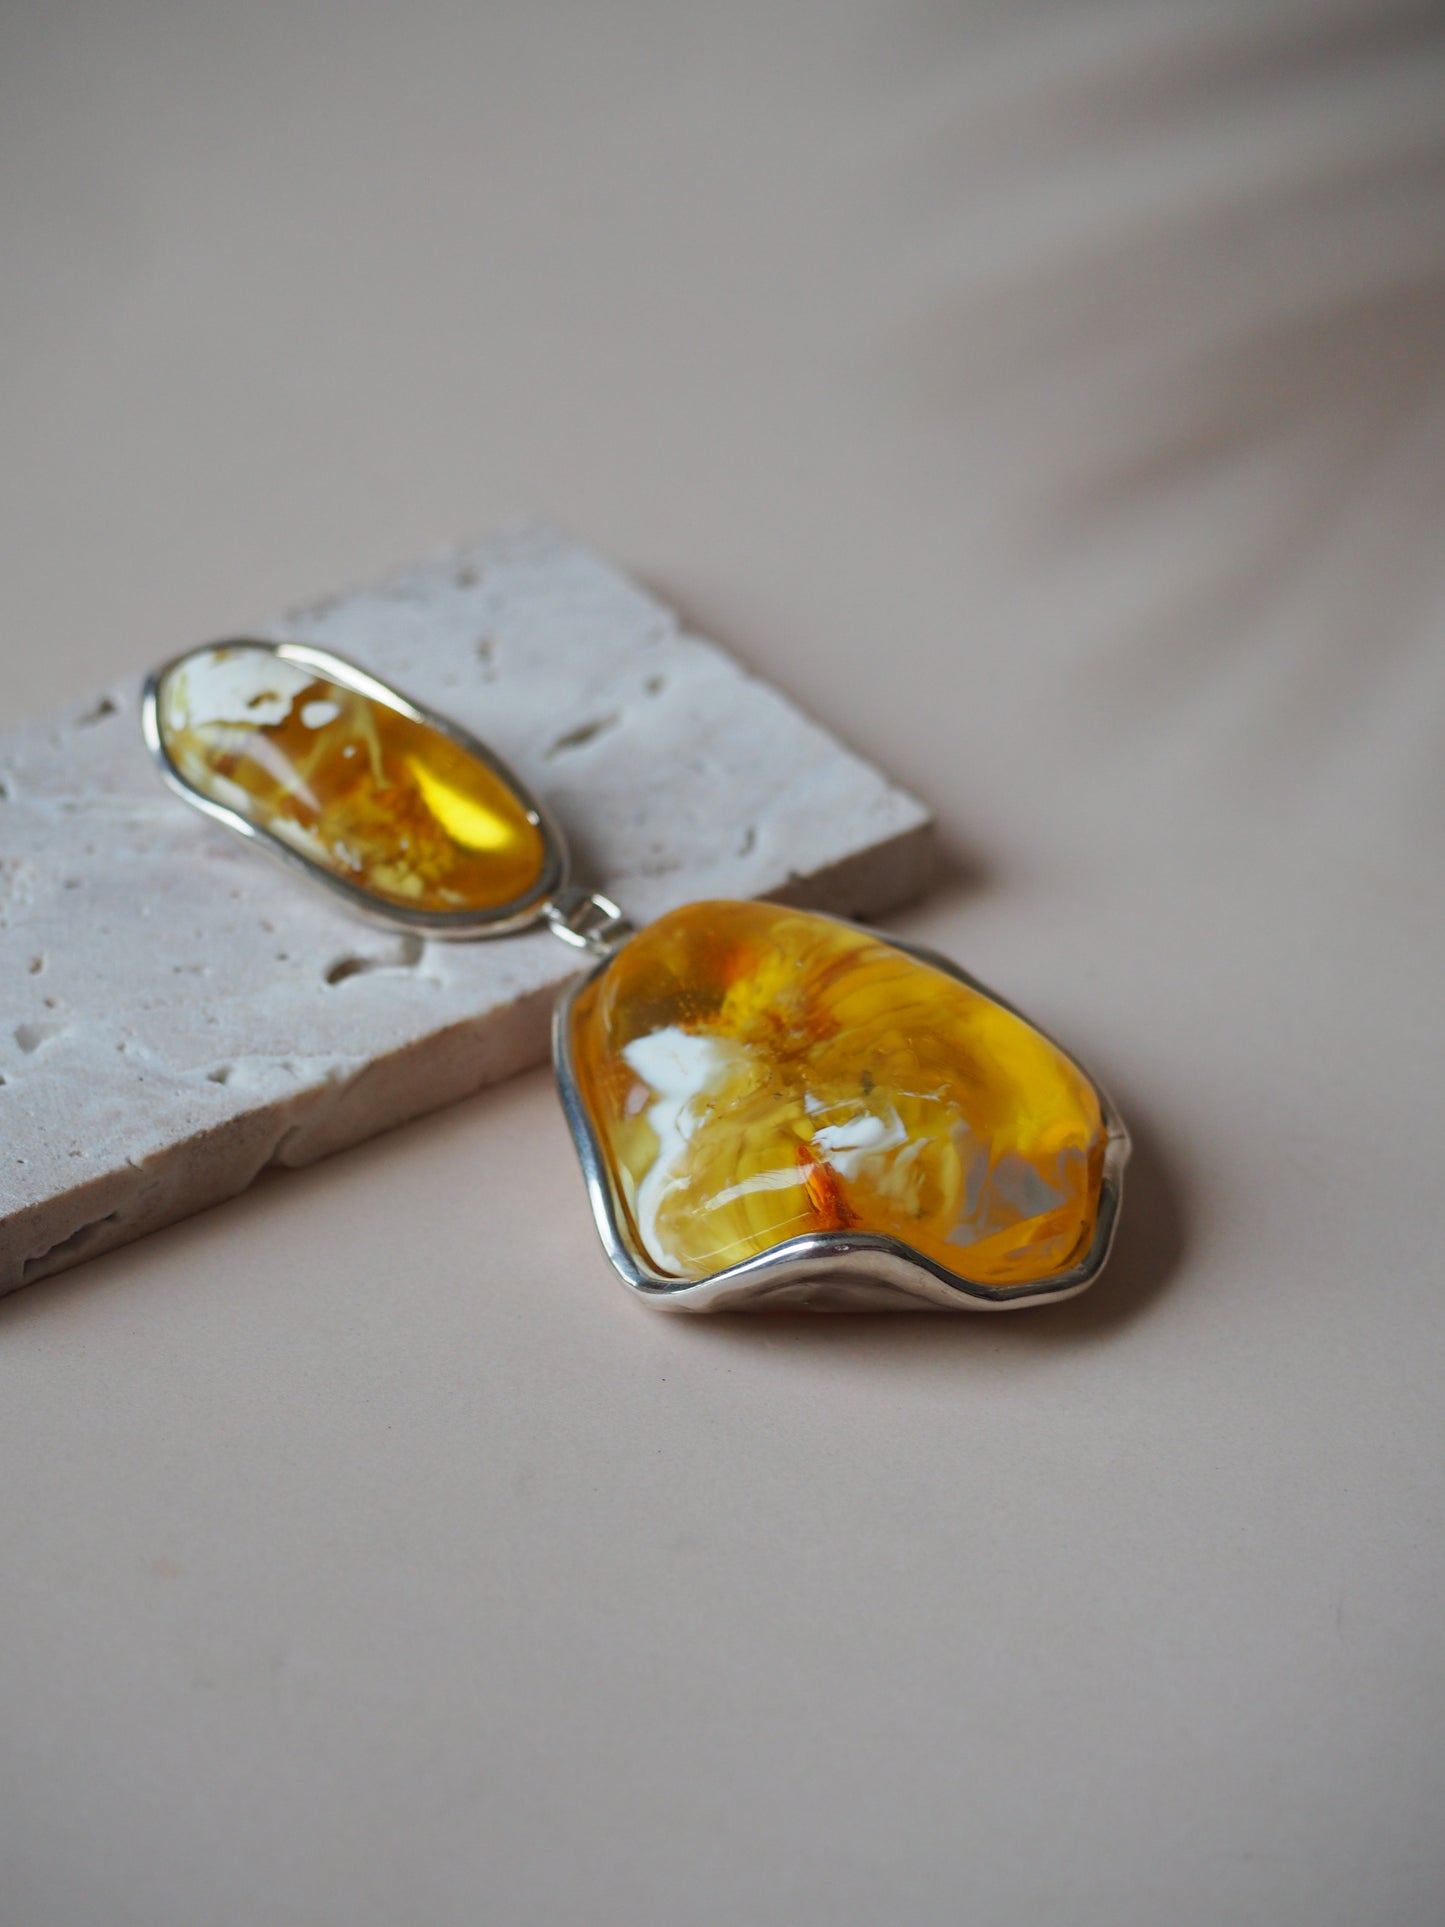 Unique Huge Natural Amber Pendant with Silver